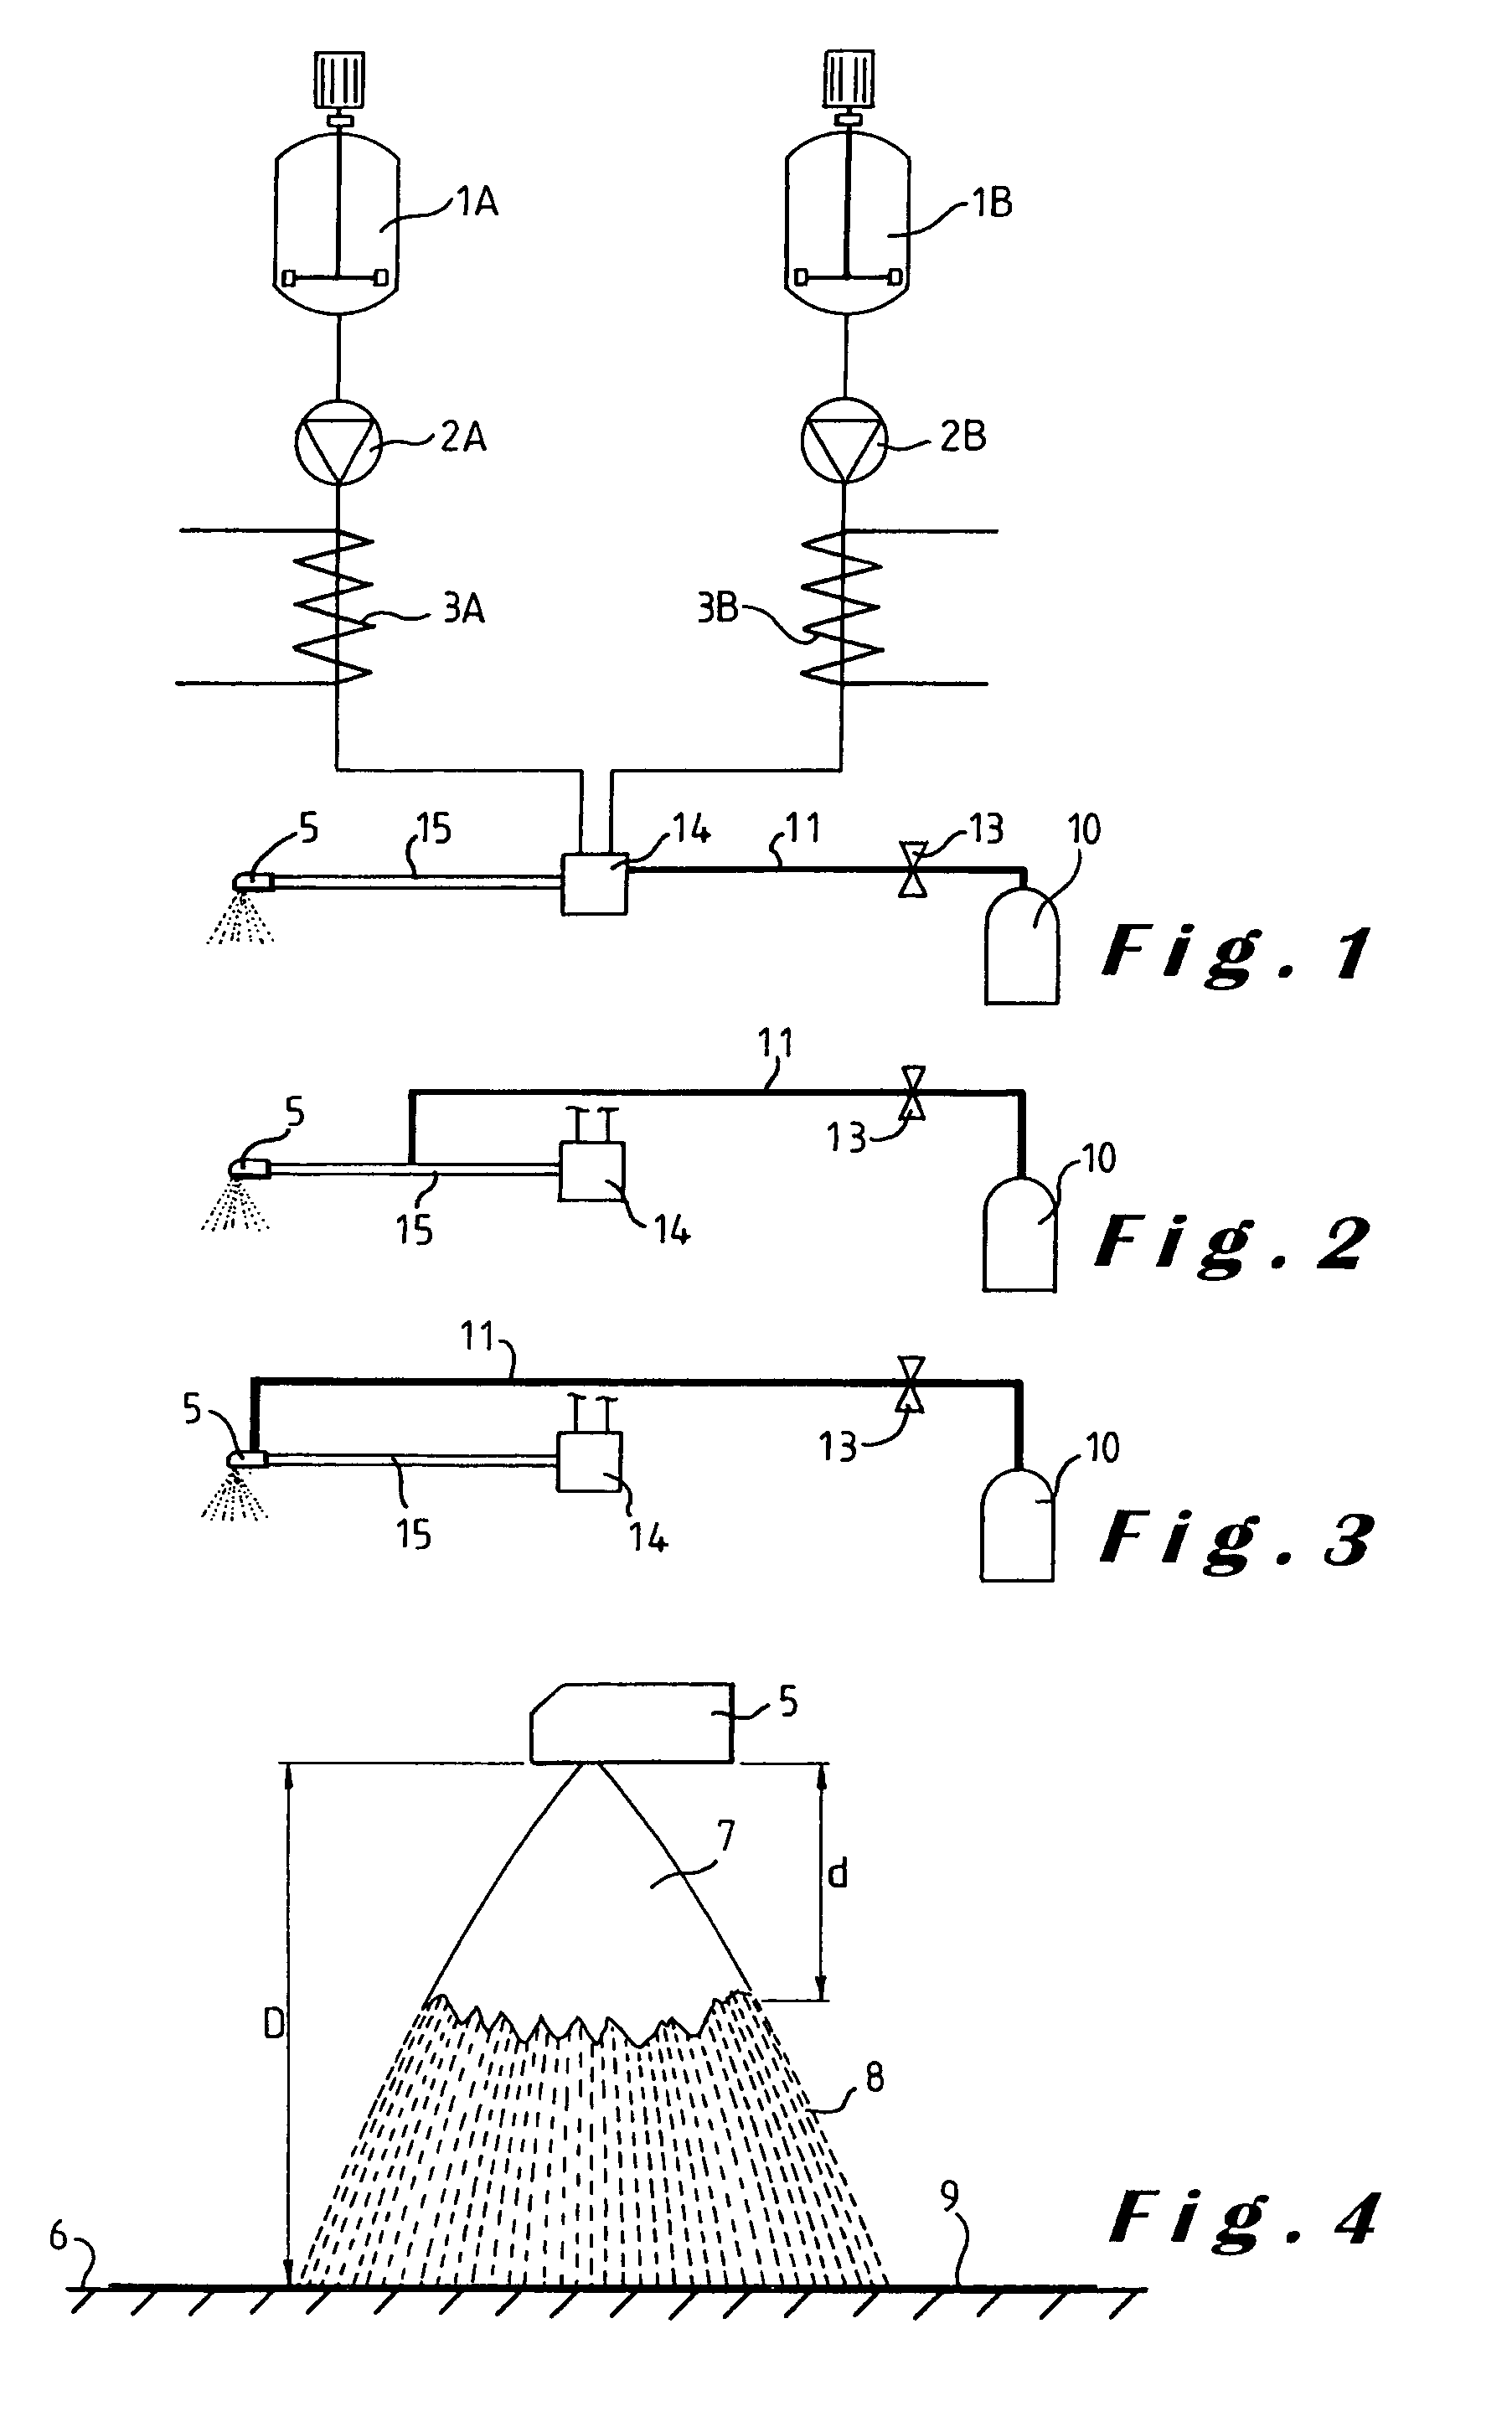 Method for producing a moulded article comprising a sprayed polyurethane layer